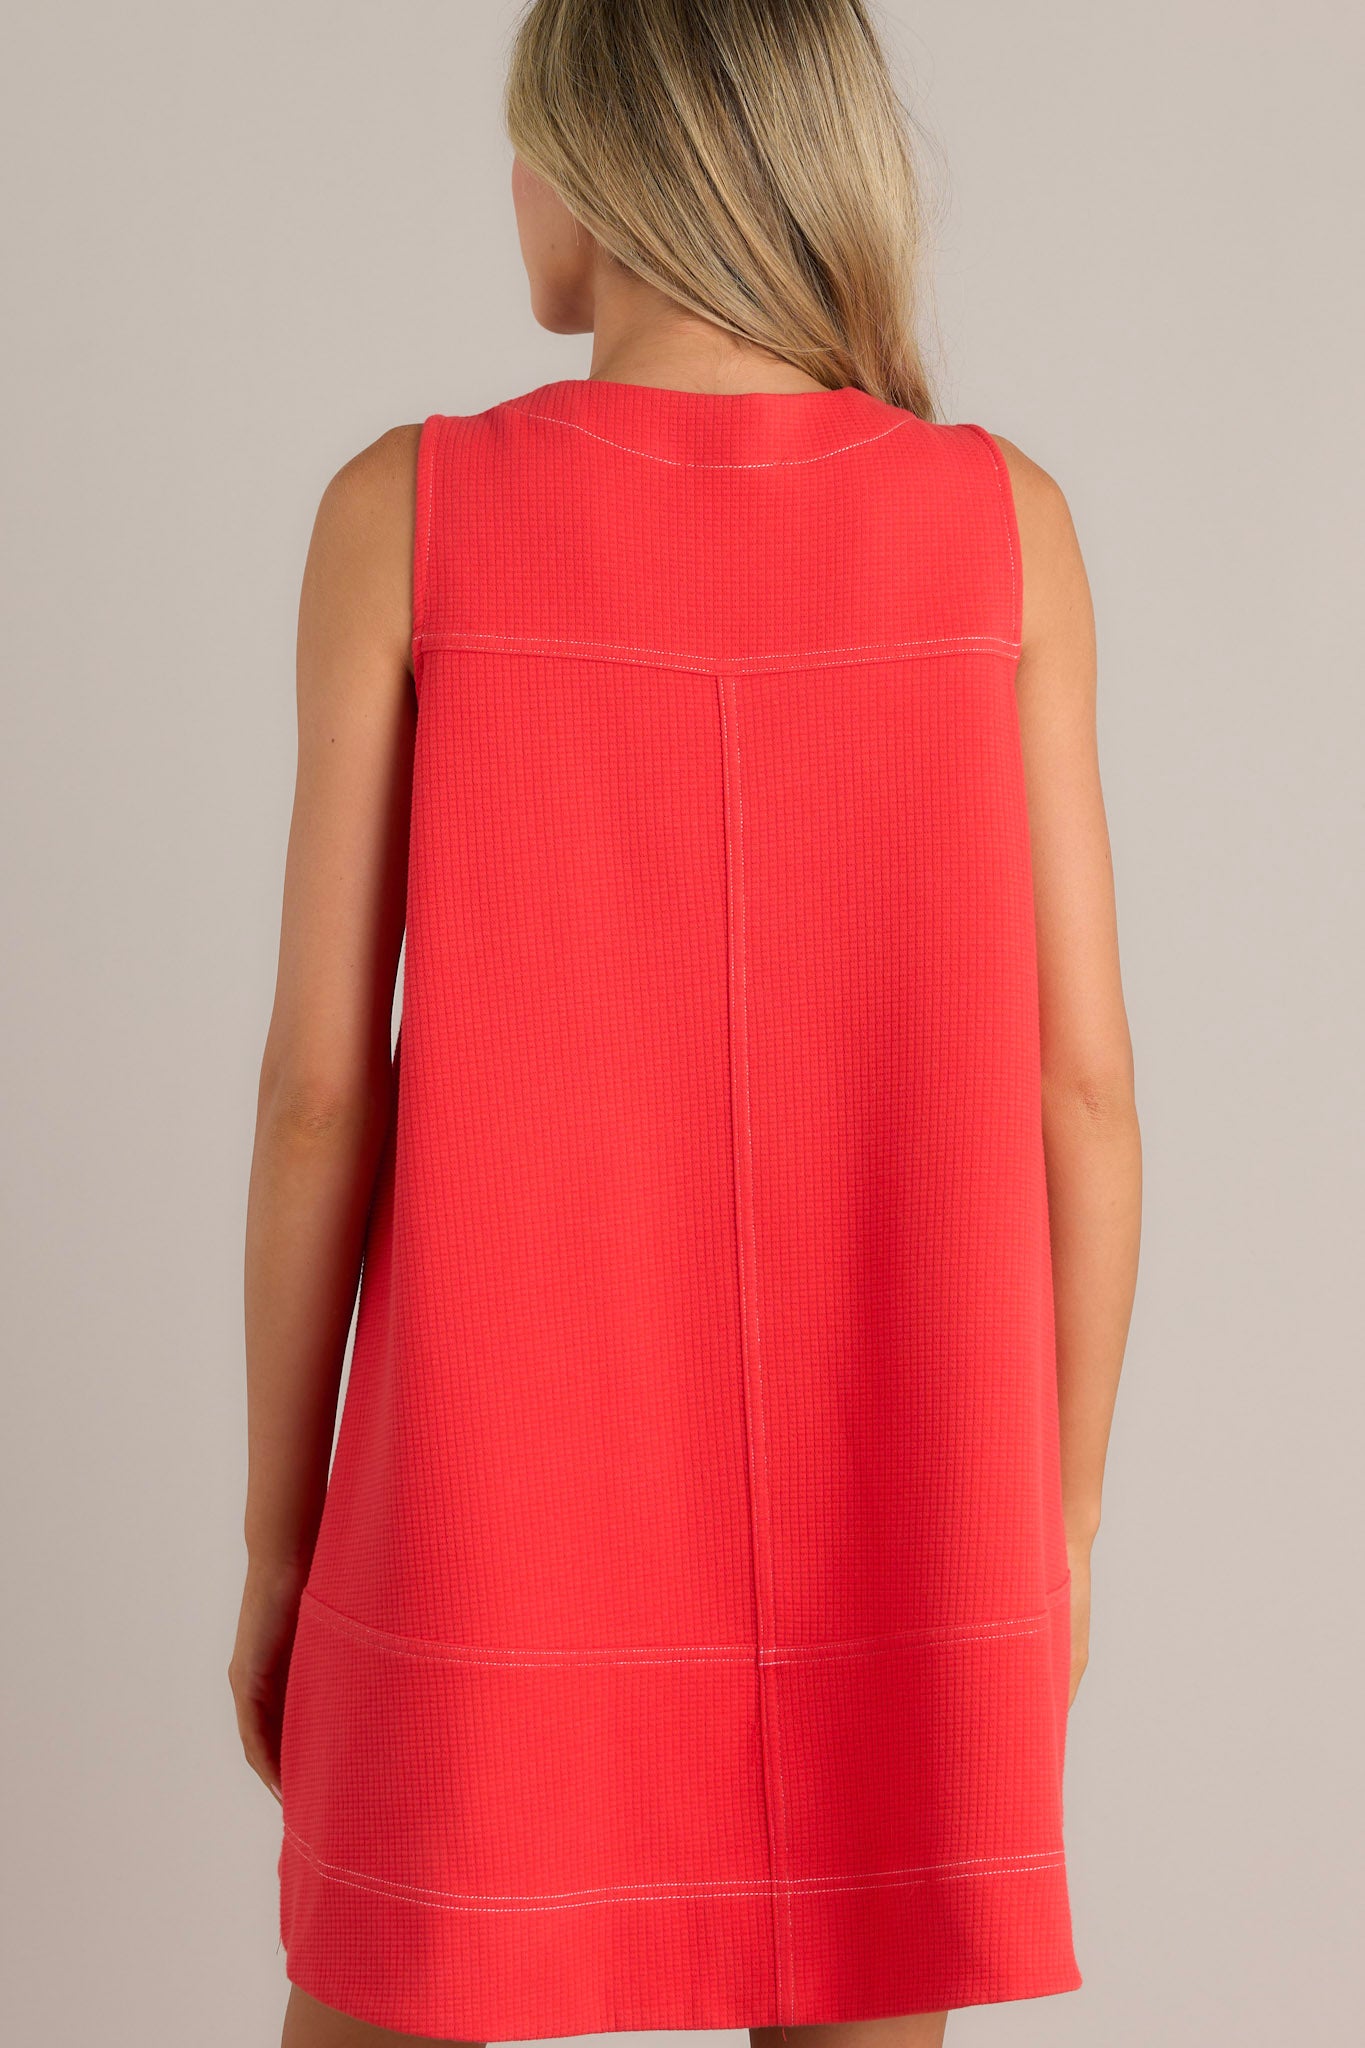 Back view of this sleeveless, A-line coral dress with a front zipper detail and two large pockets, featuring a loose and casual fit.